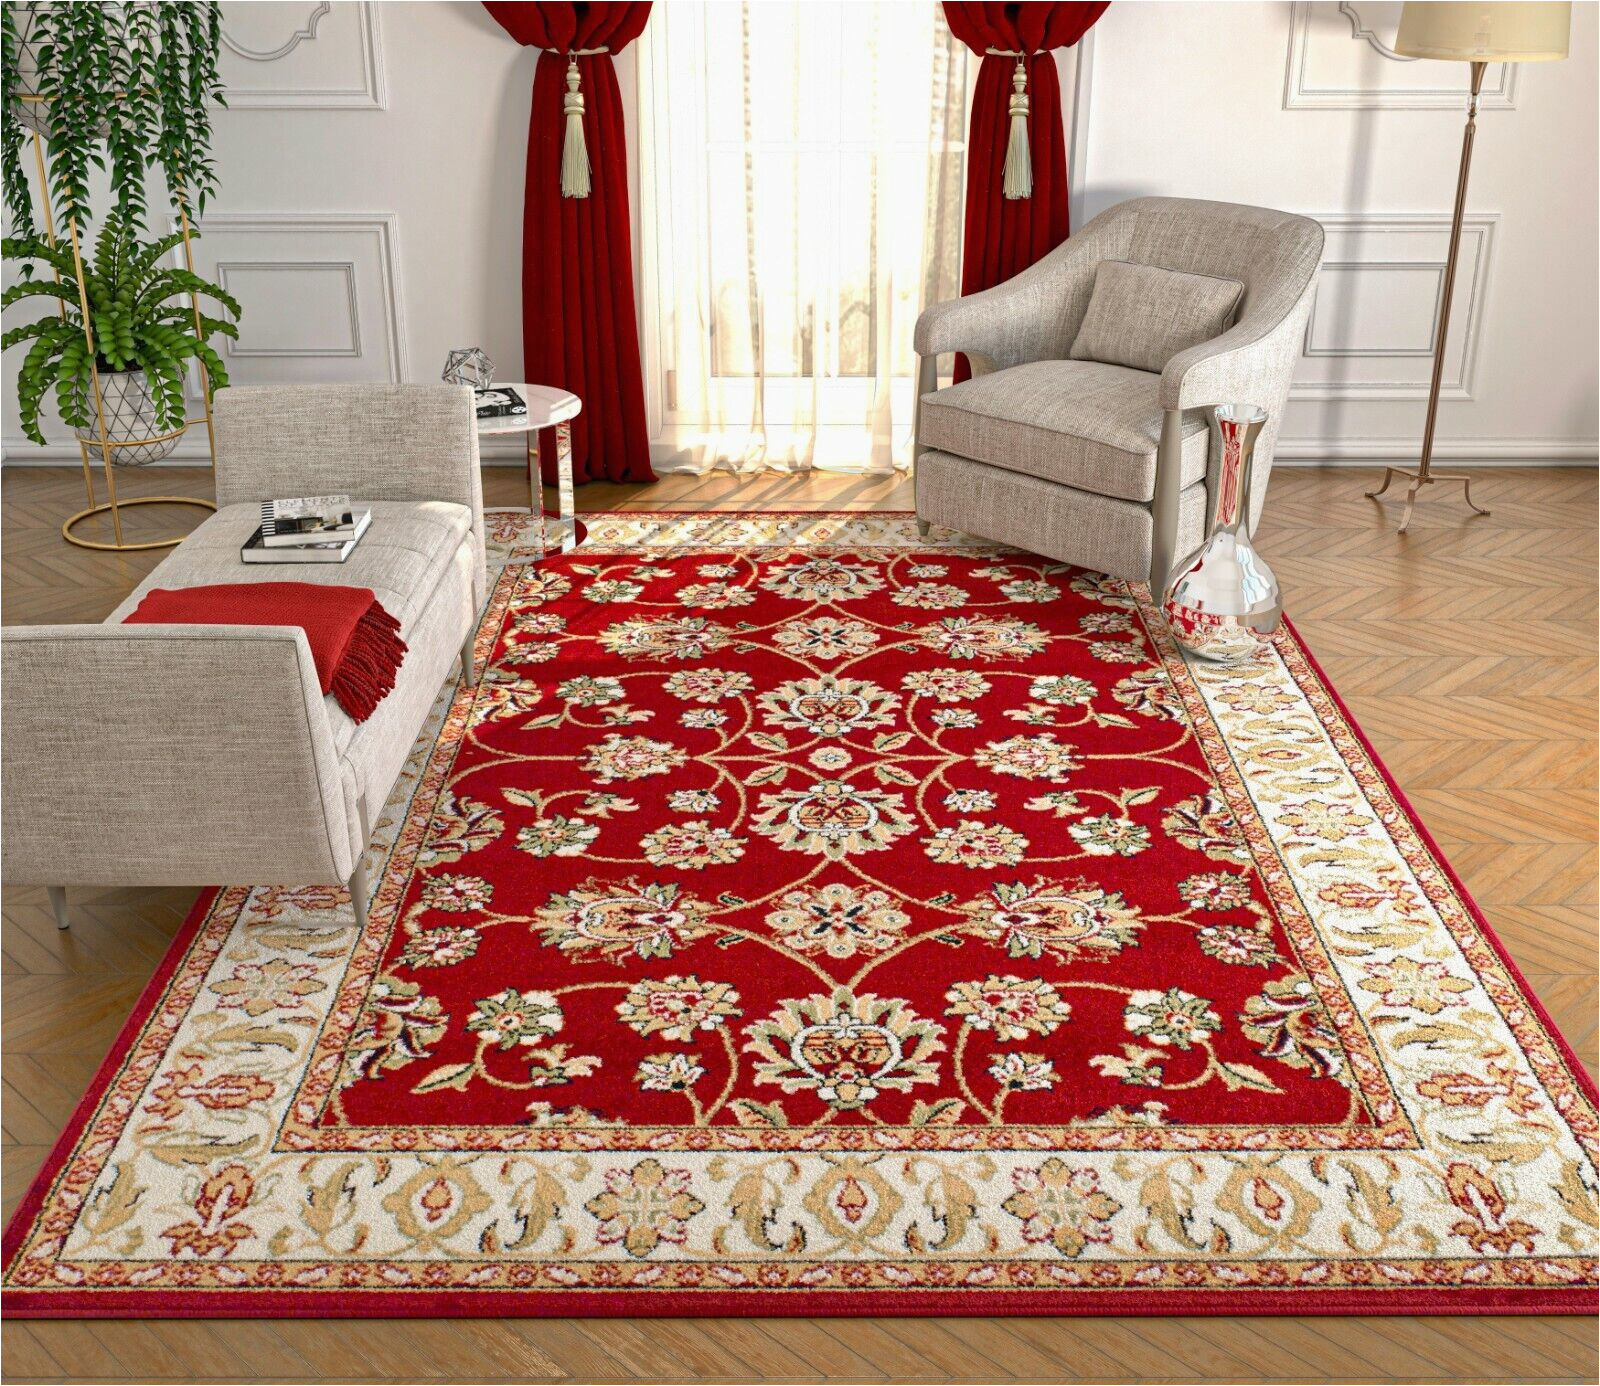 8 X 10 Traditional area Rugs New Red area Rugs 8×10 Living Room Rugs Floor oriental Carpet Traditional Rugs